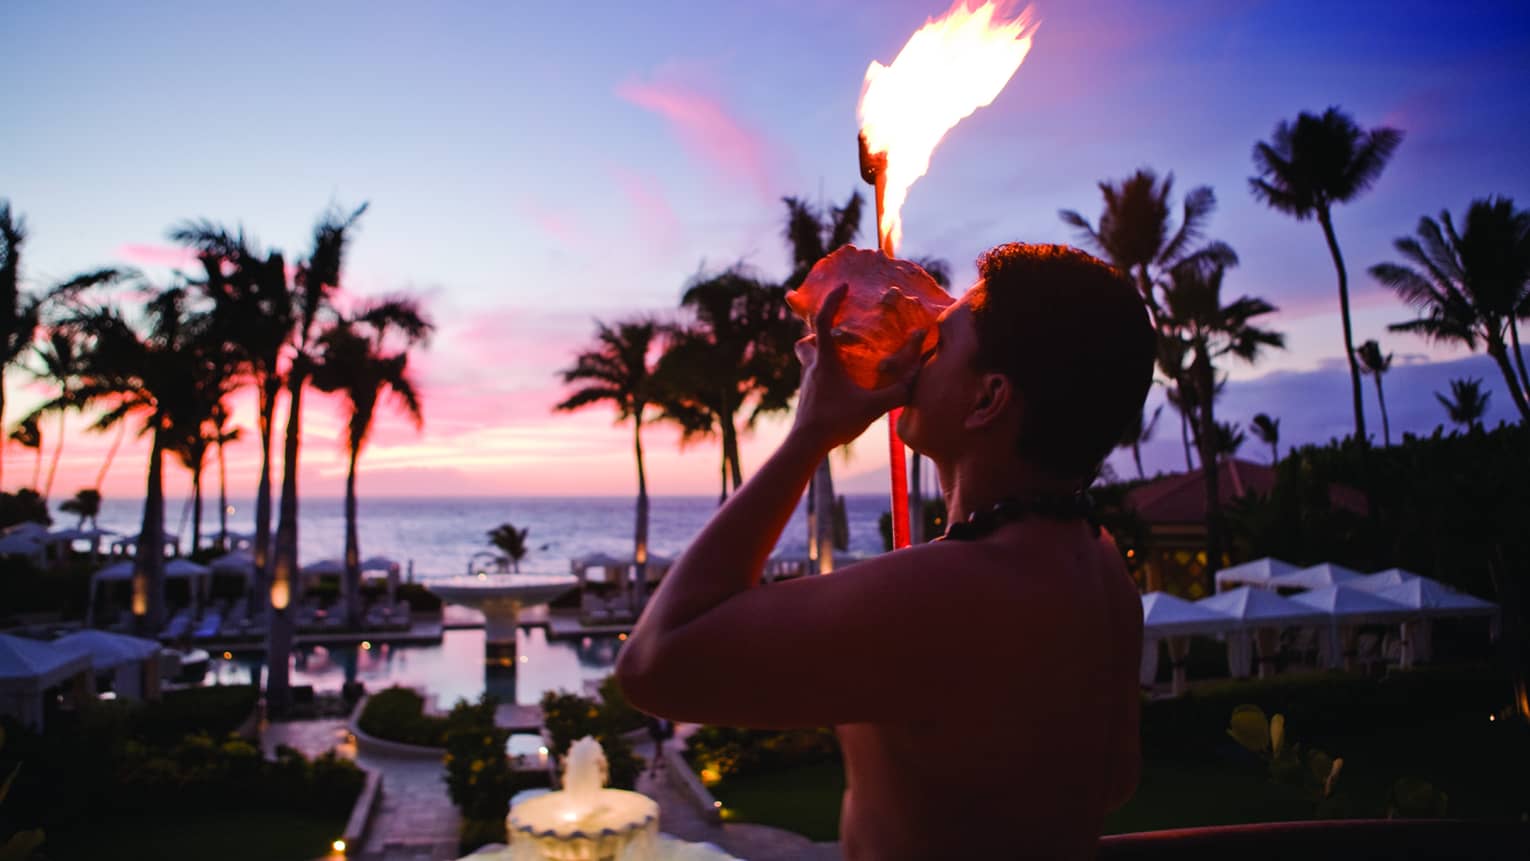 A staff member lights a torch with a view of the ocean